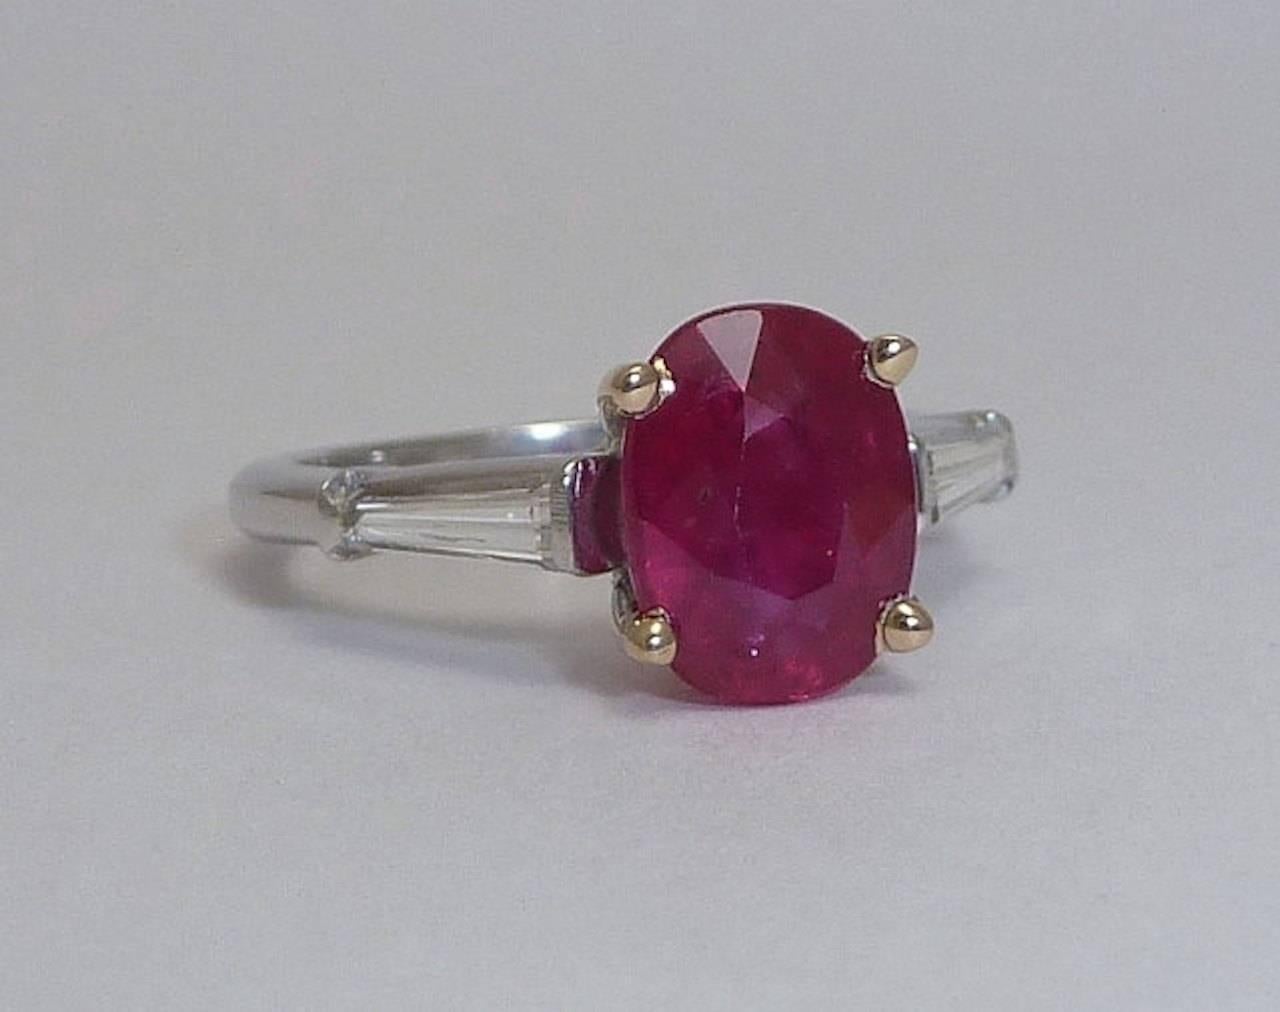 Beacon Hill Jewelers Presents:

An exceptional natural Heat Only 2.46 carat total weight pigeon blood ruby and diamond ring in platinum and 18 karat yellow gold. Centered by a 2.21 carat natural Heat Only ruby set in a yellow gold mount, this ring